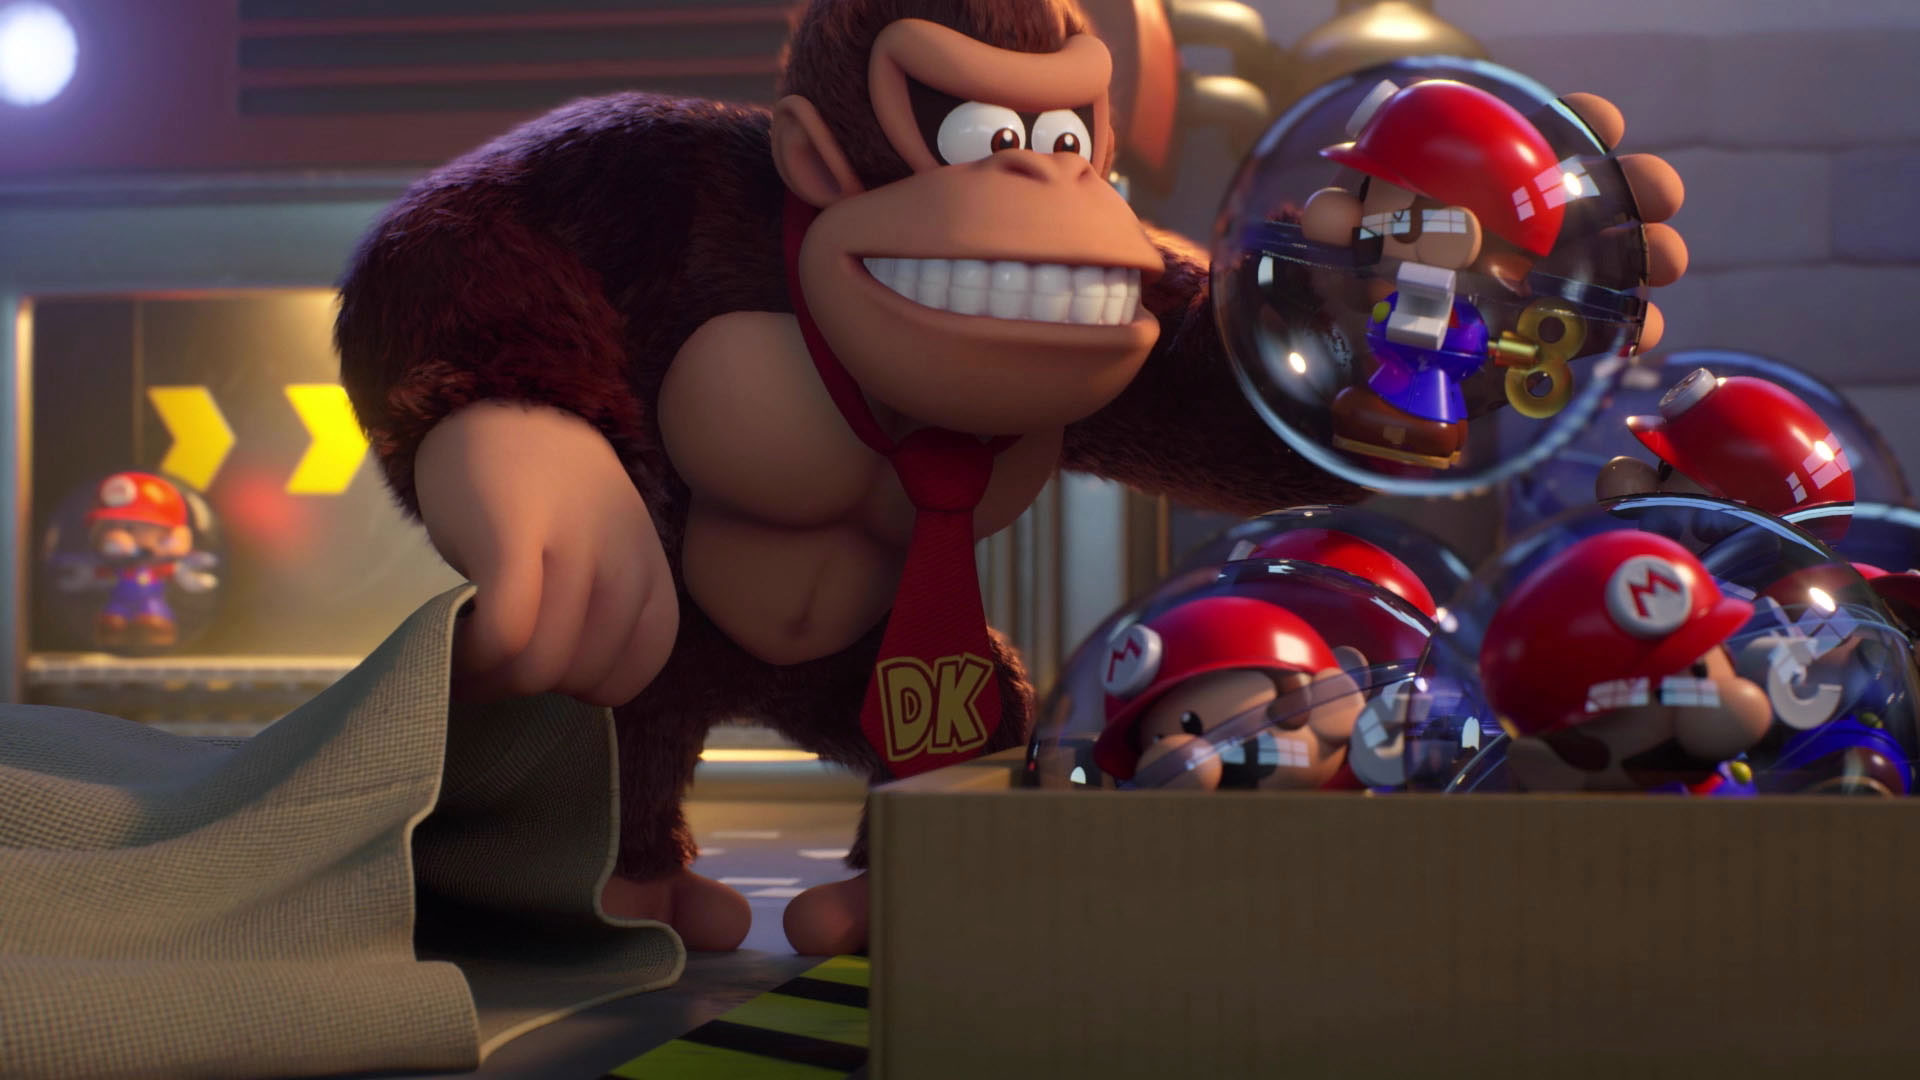 Learn more about the upcoming Mario vs. Donkey Kong game